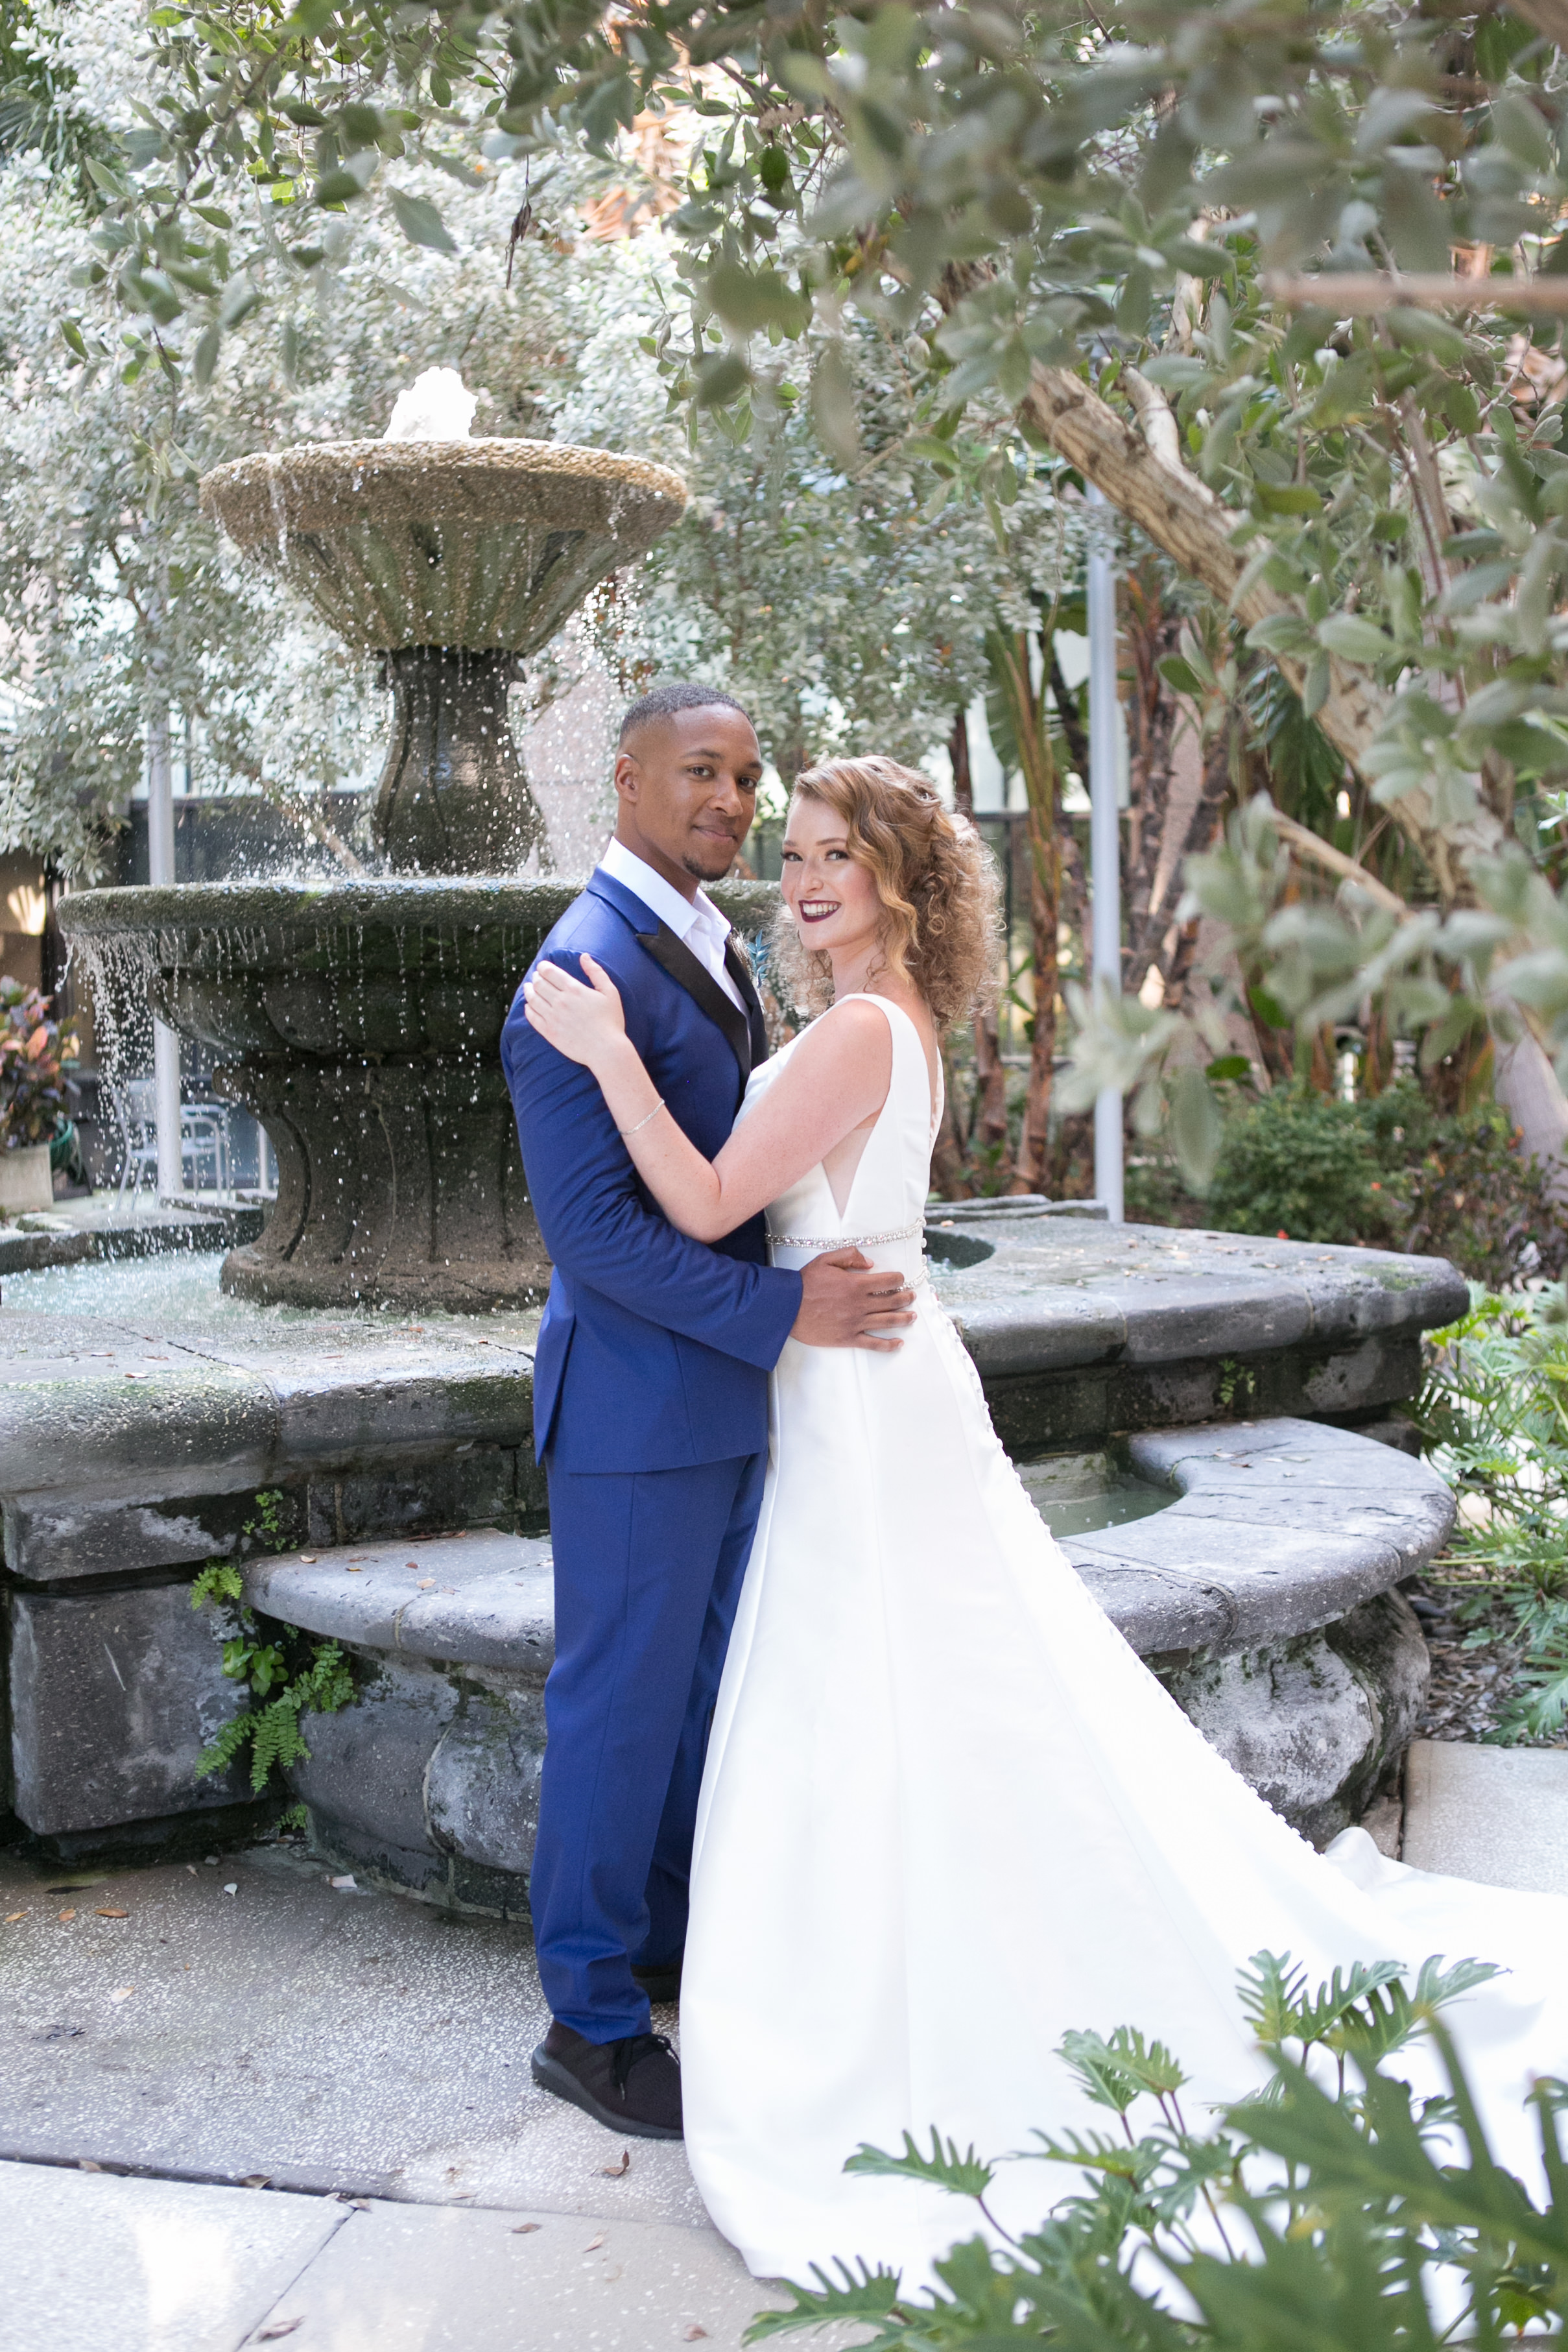 Romantic Classic Bride and Groom Wedding Portrait, Groom in Blue Suit with Black Collar Trim | Tampa Bridal Wedding Dress Boutique Truly Forever Bridal | South Tampa Bridal Hair and Makeup Michele Renee the Studio | Wedding Photographer Carrie Wildes Photography